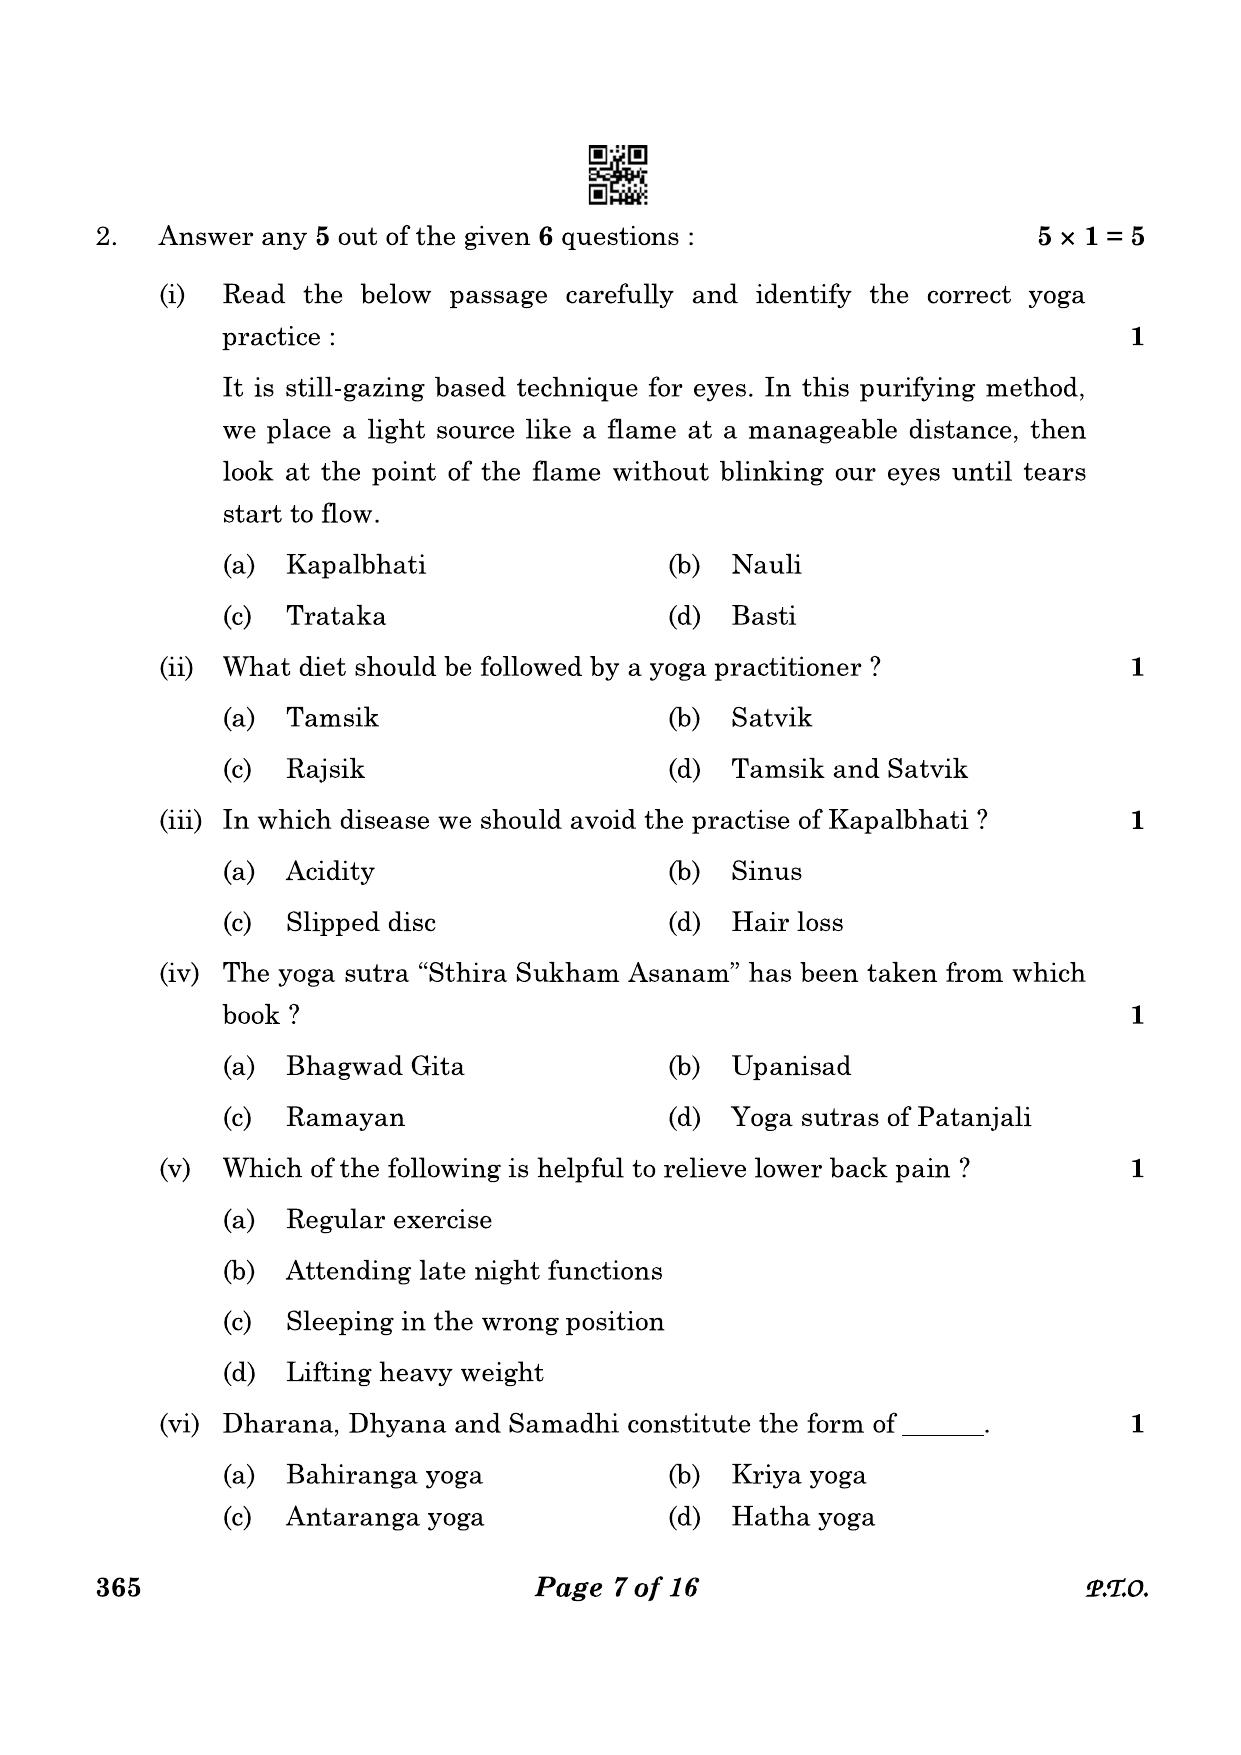 CBSE Class 12 365_Yoga 2023 Question Paper - Page 7